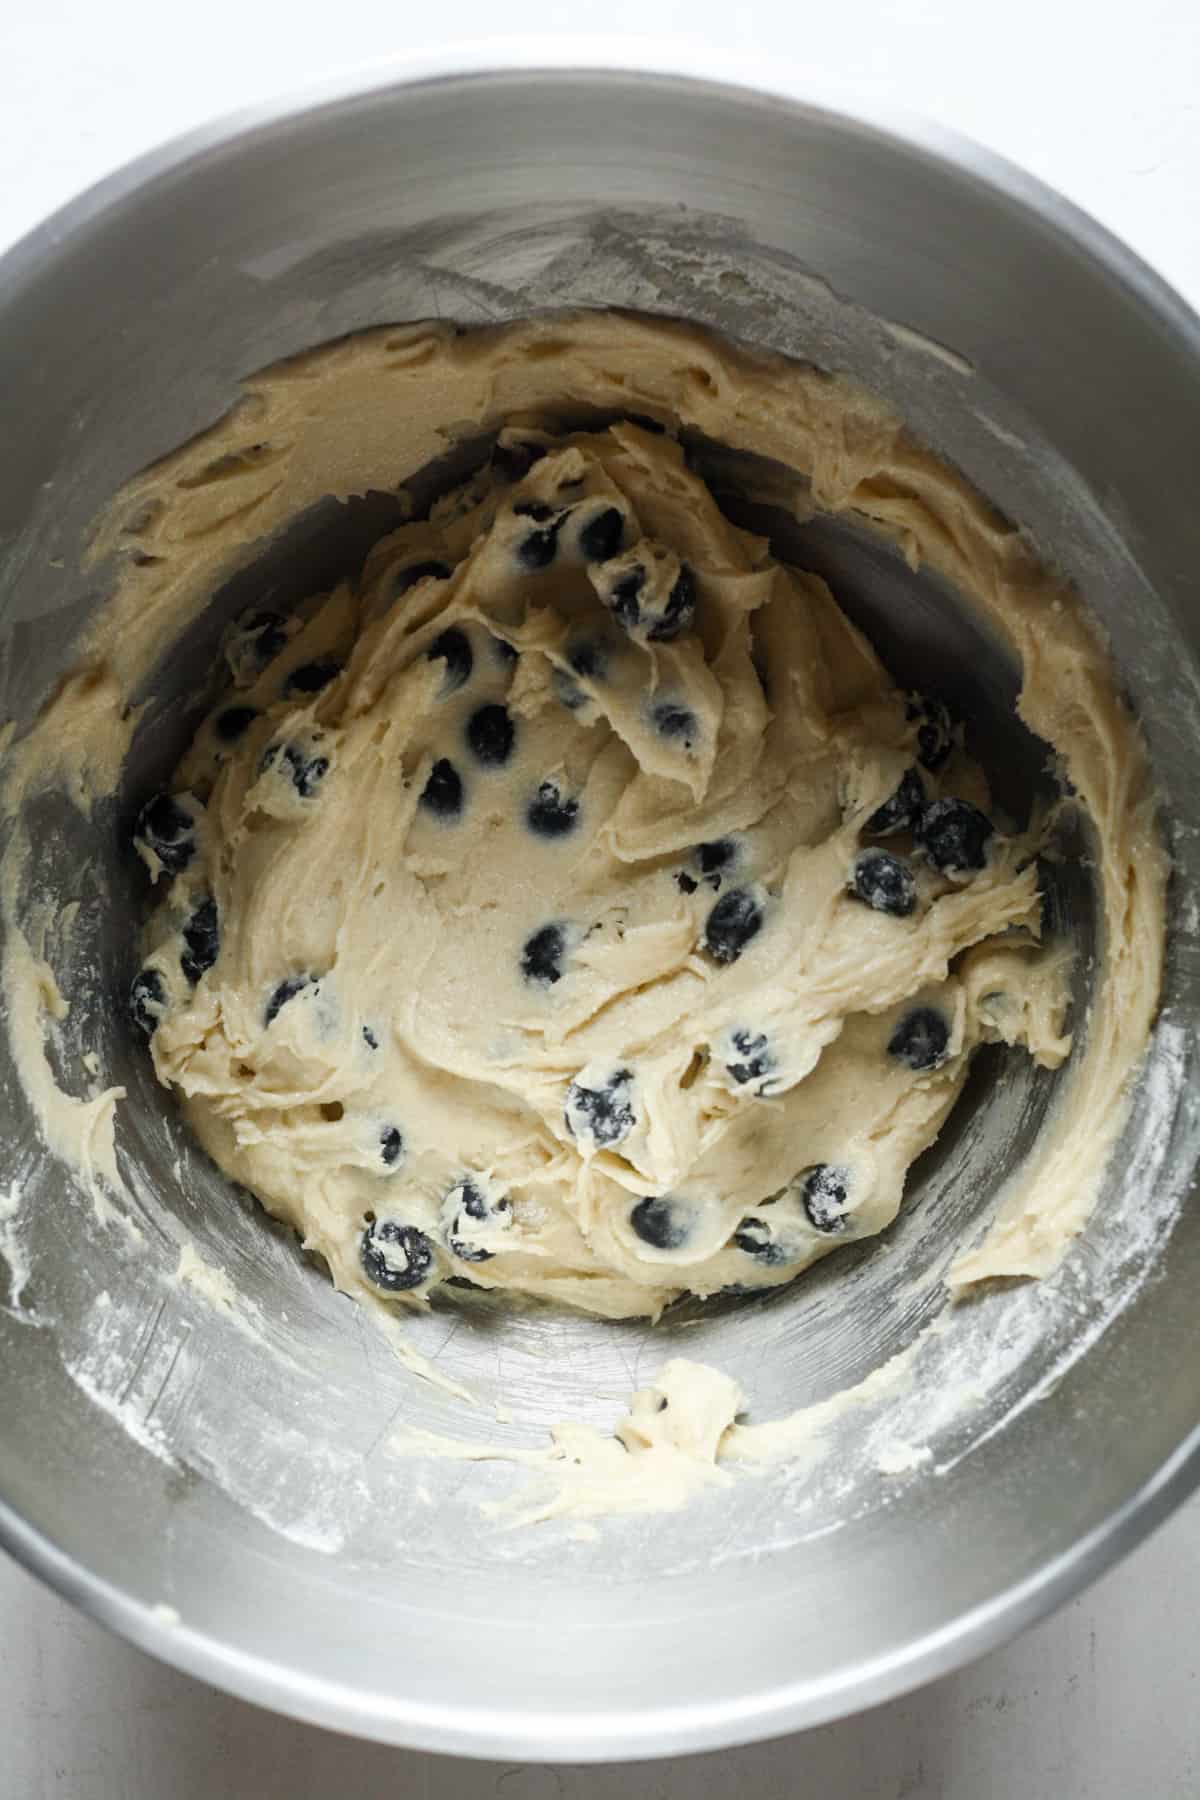 Blueberry muffin batter in bowl.